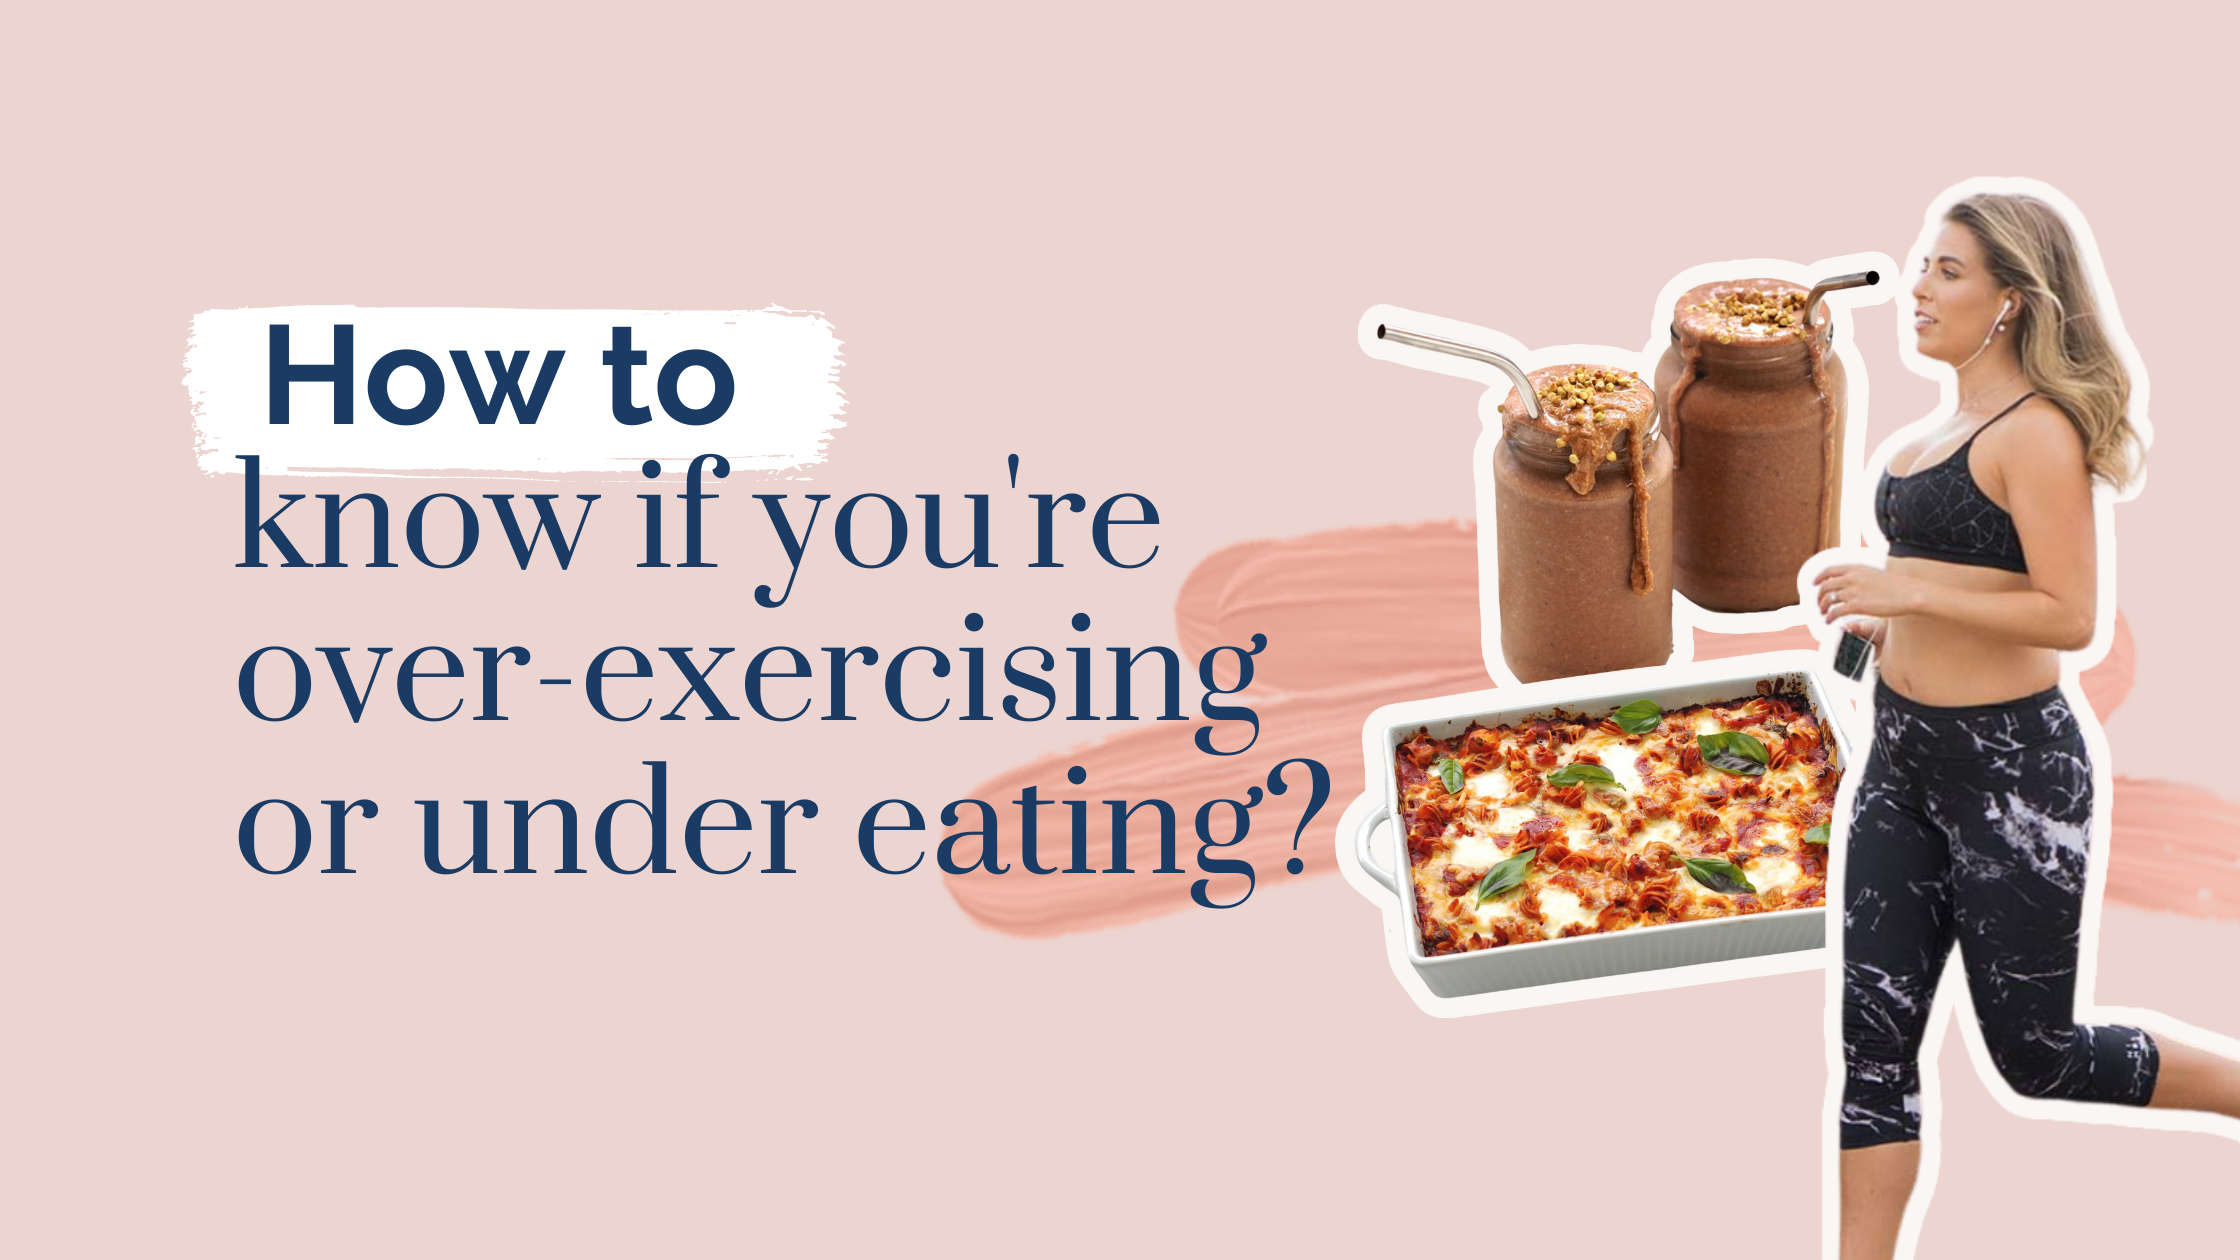 How to know if you're over exercising or under eating?